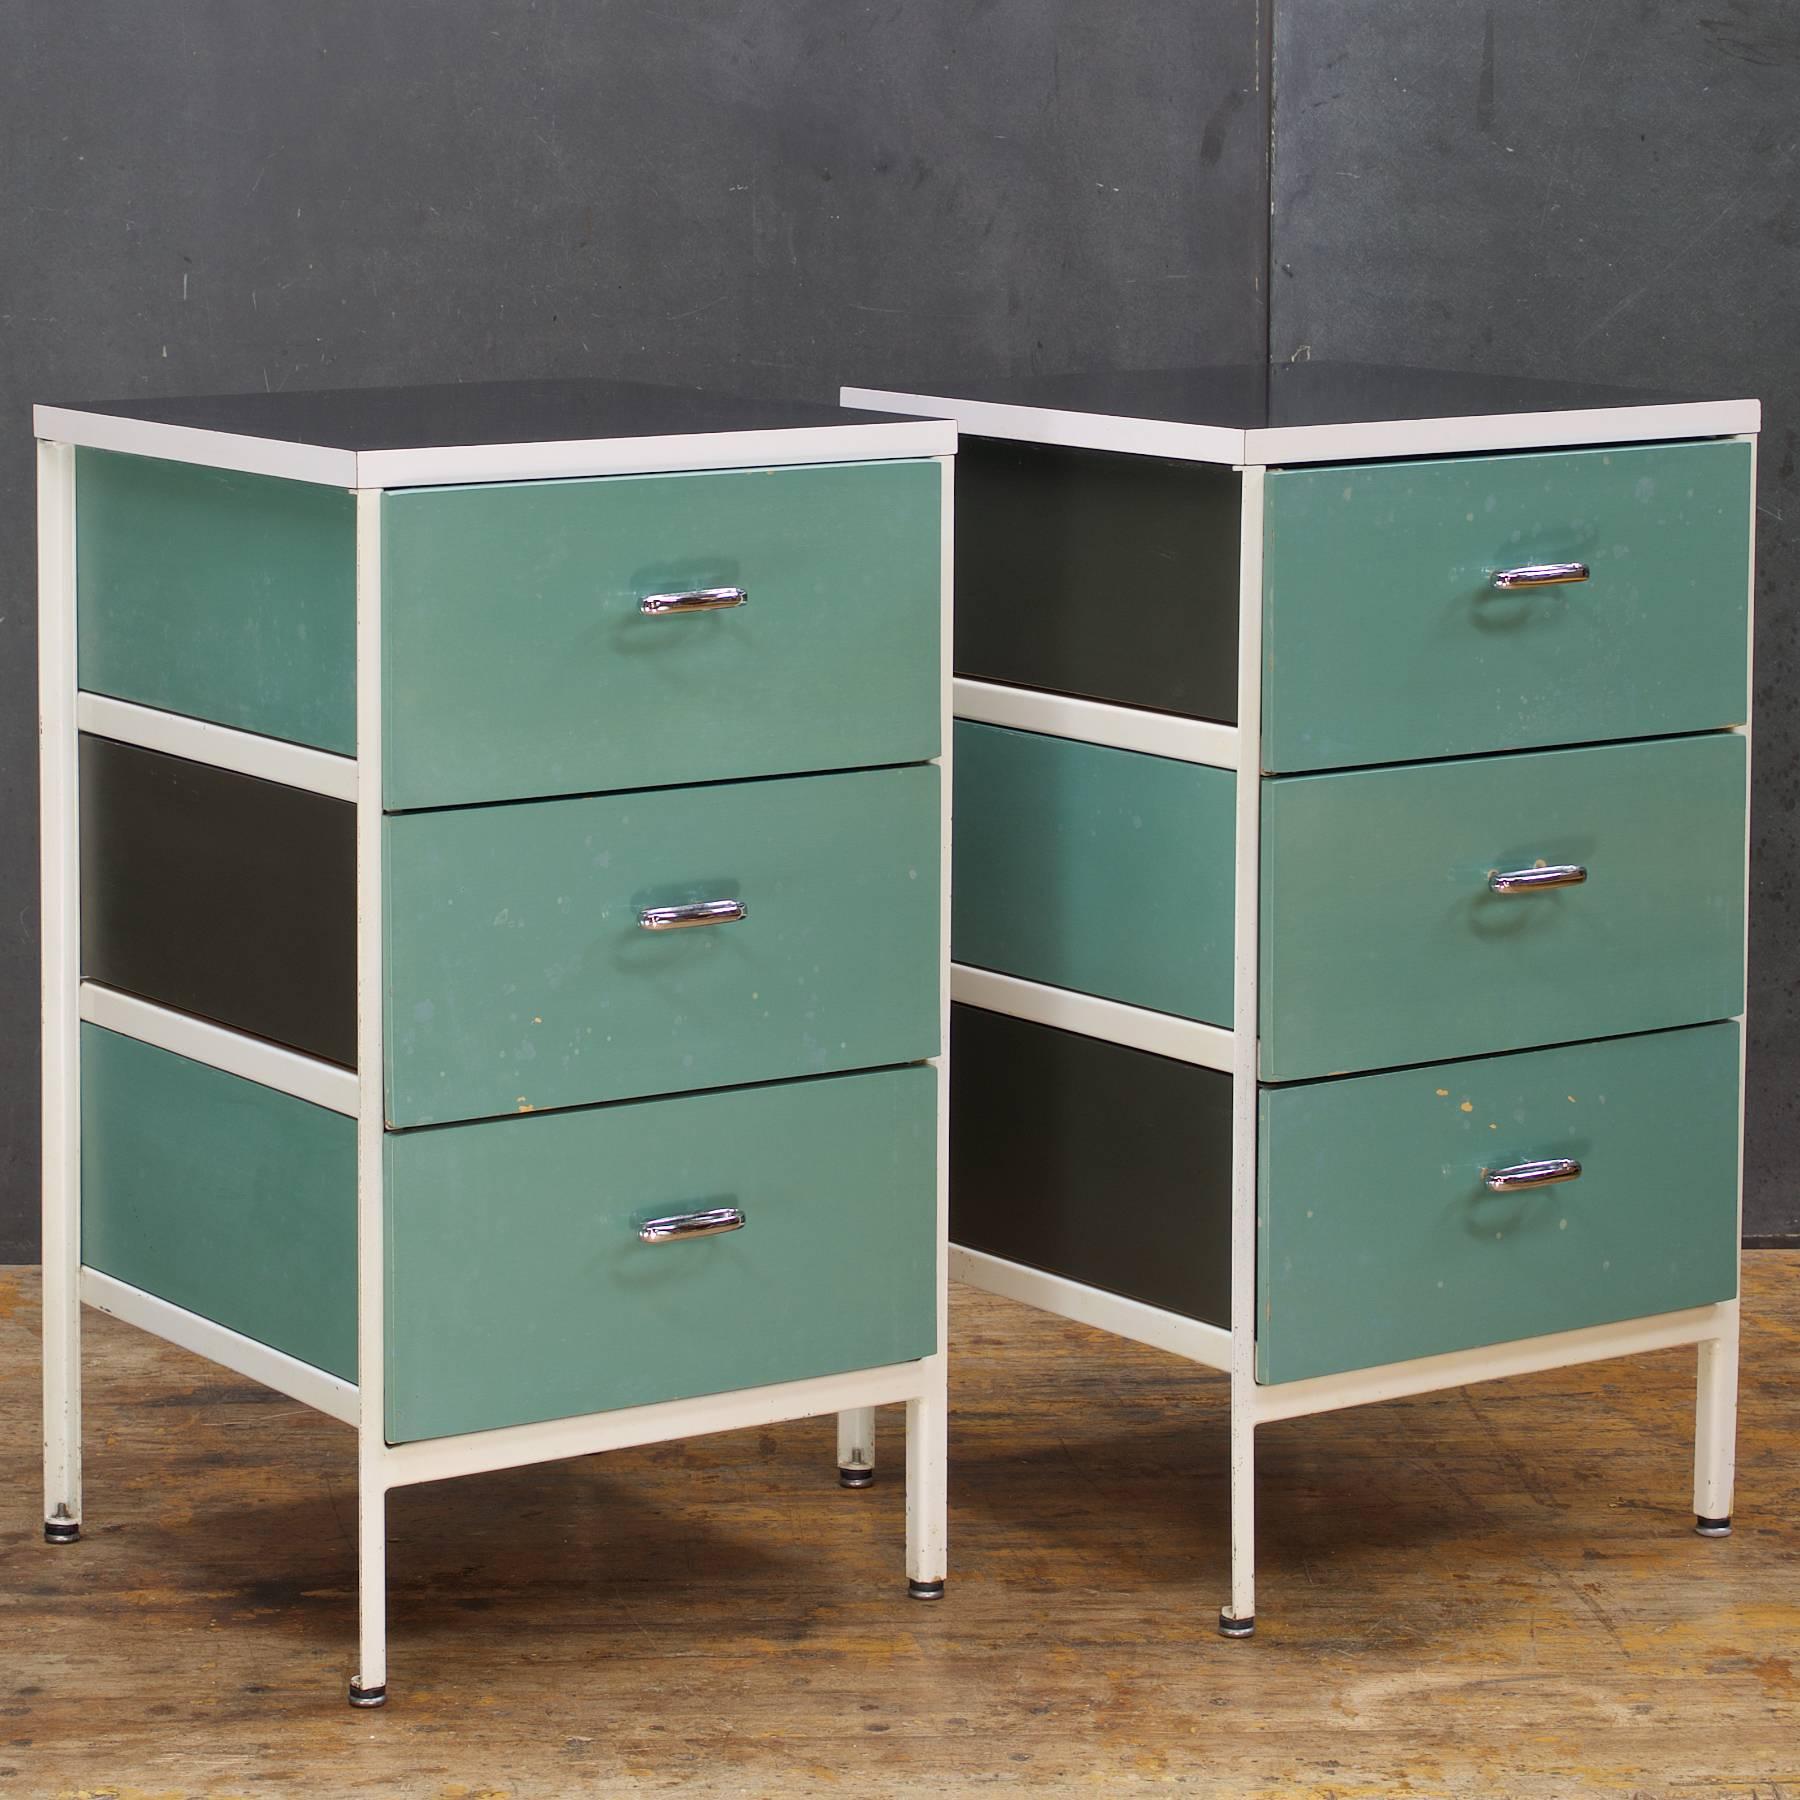 Wonderful Rare half-dressers, or companion cabinets for the office or nightstand bedside tables. Worn, stained and patinated, presented in the original finish, just cleaned and polished